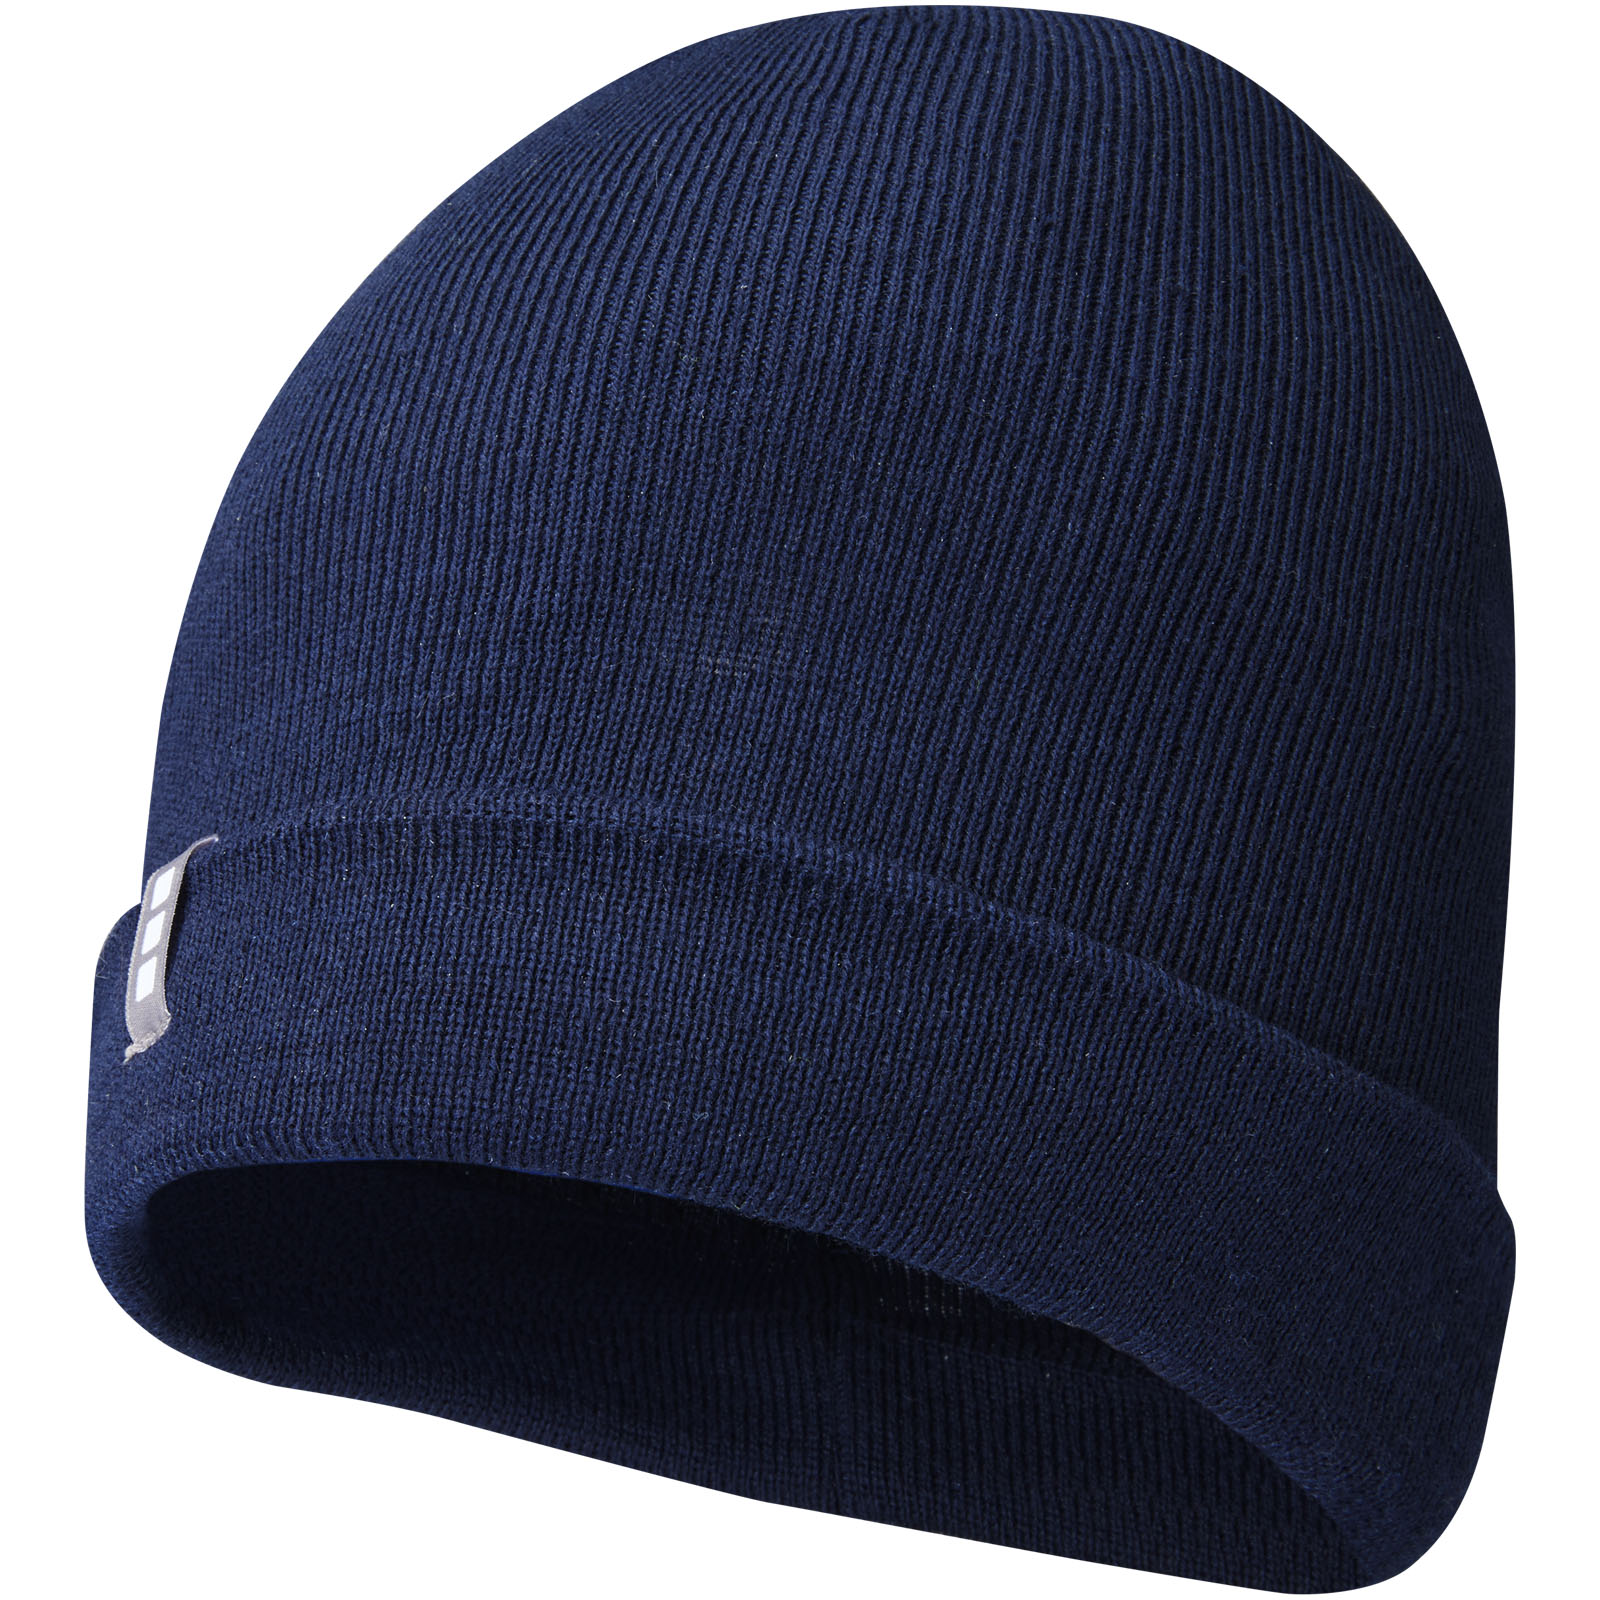 Sustainable Branded Beanie - Bourton-on-the-Water - Kingston upon Hull